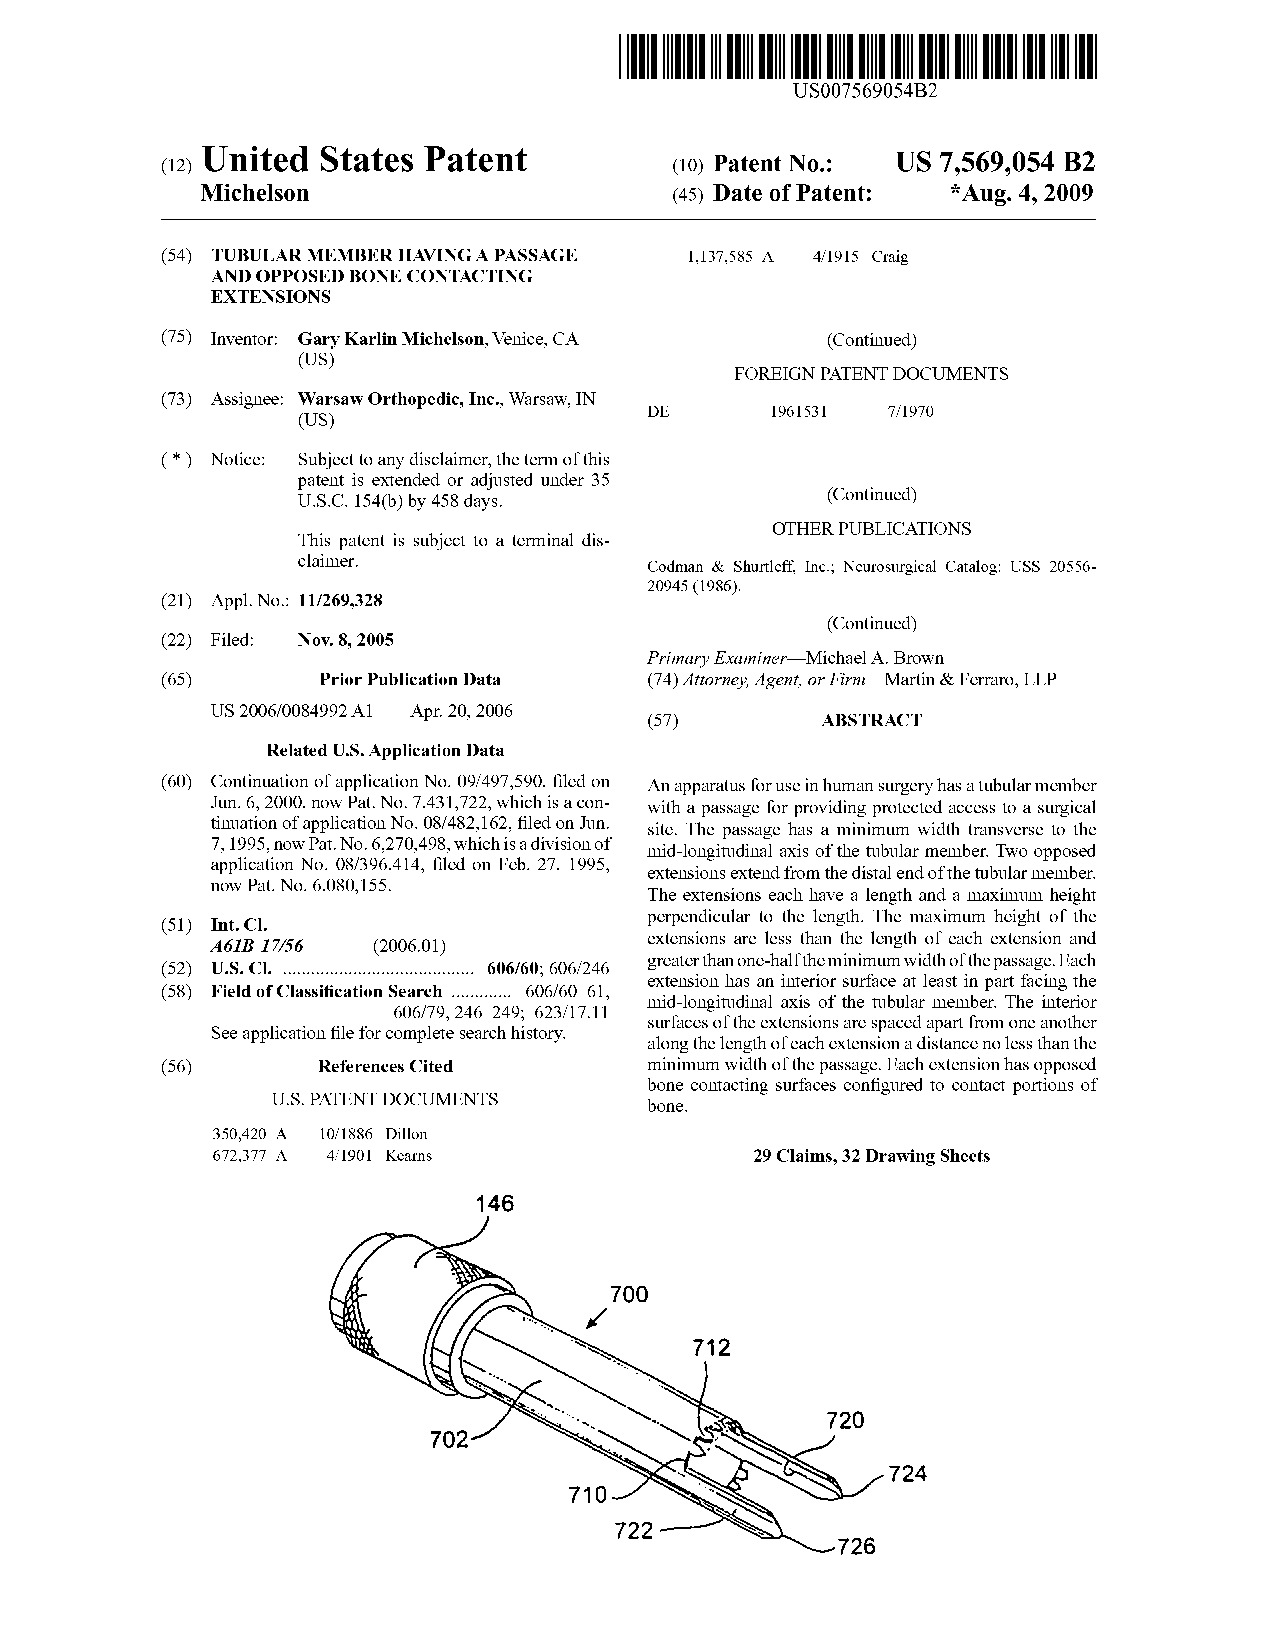 Tubular member having a passage and opposed bone contacting extensions - Patent 7,569,054